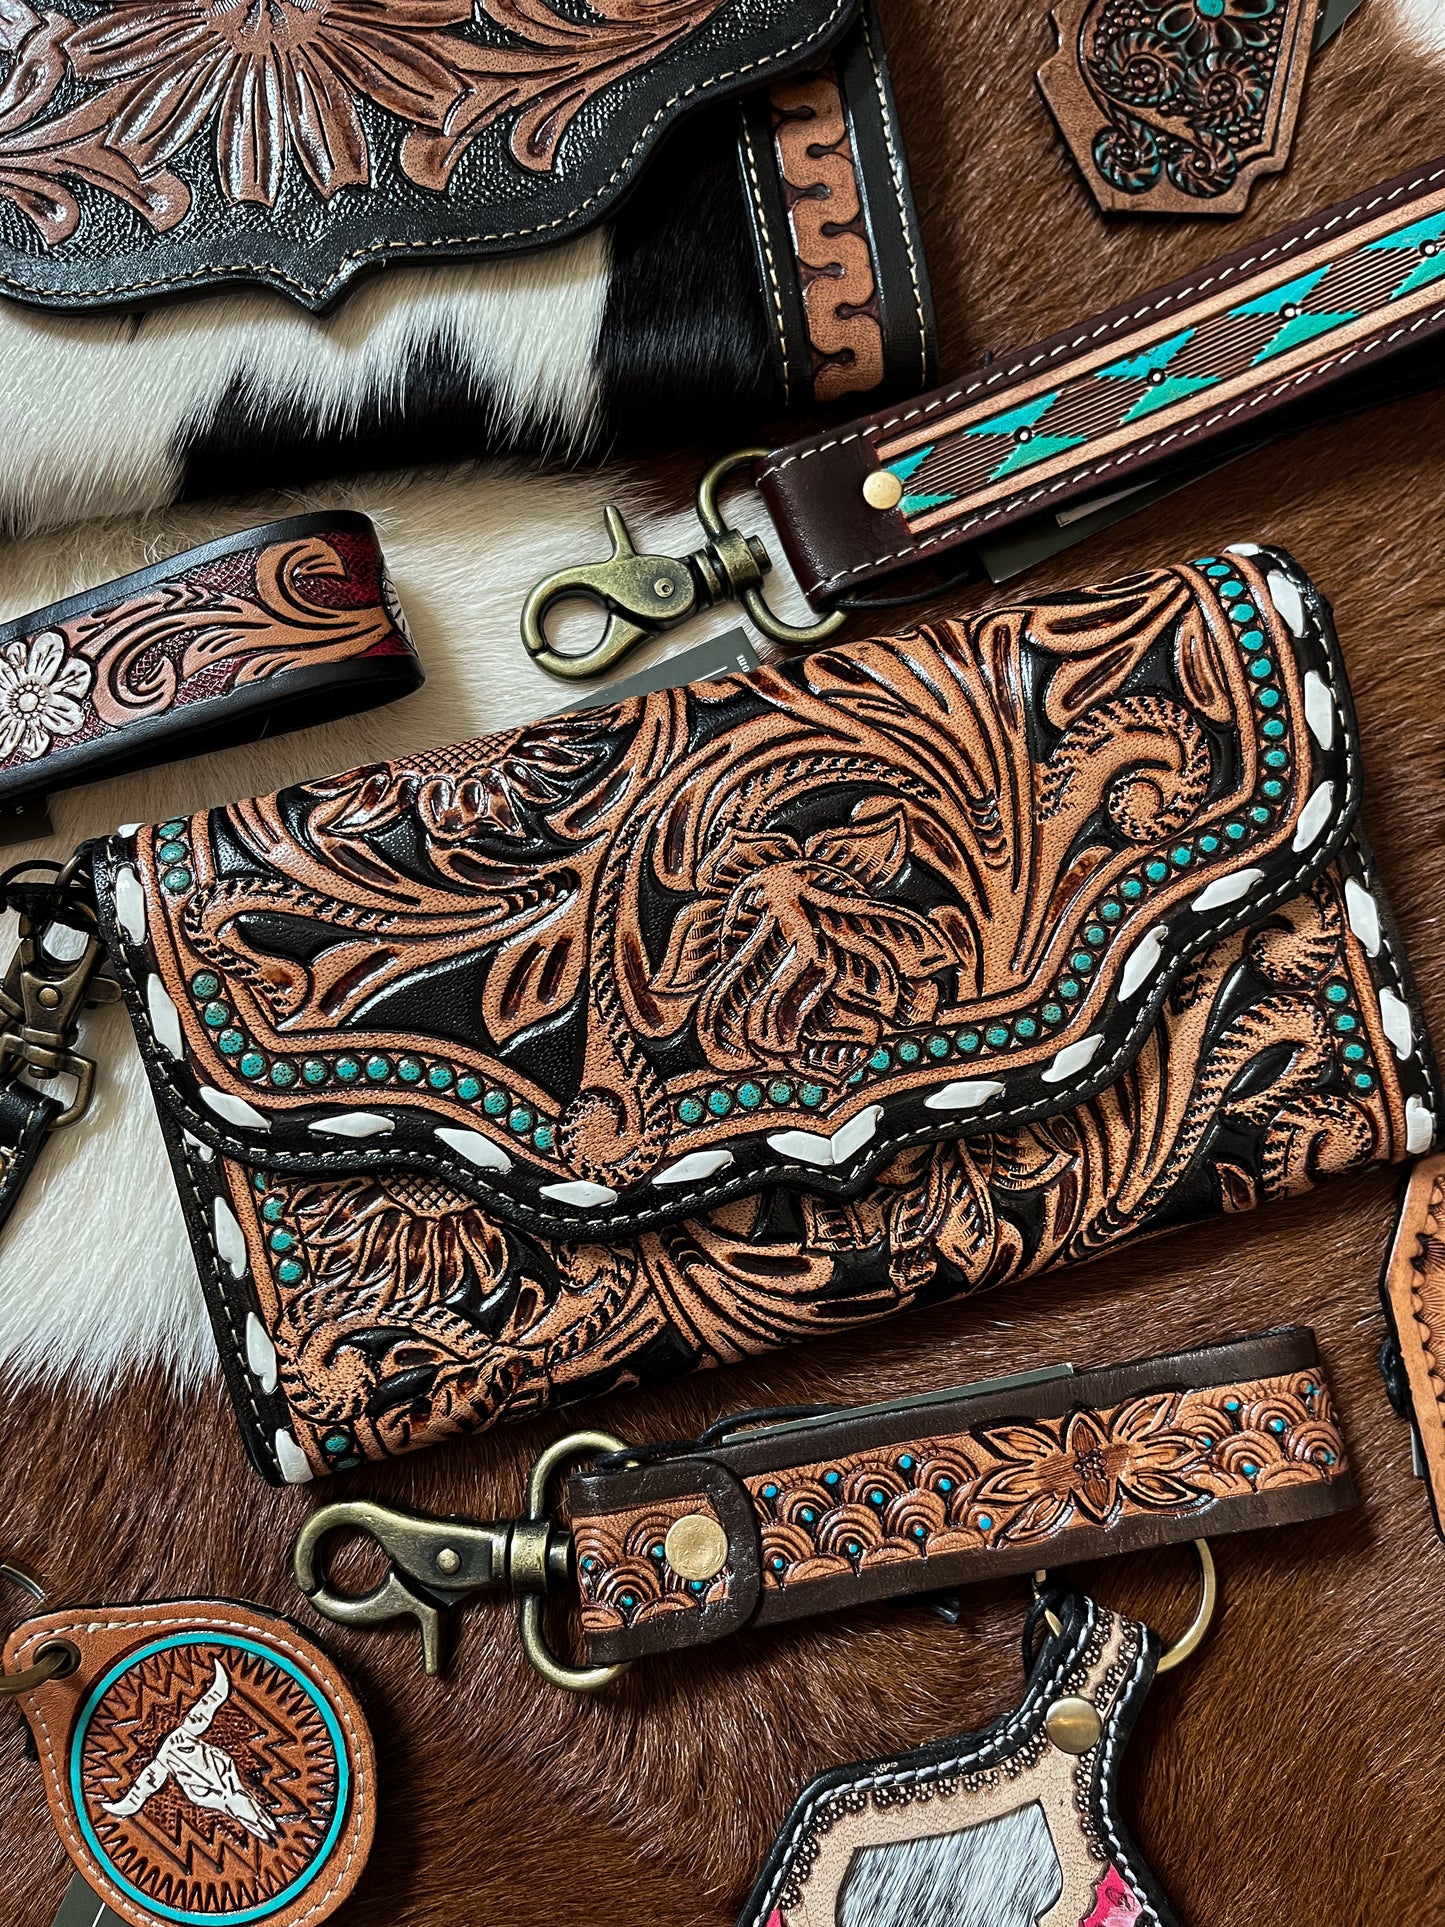 The Tooled Turquoise Wallet